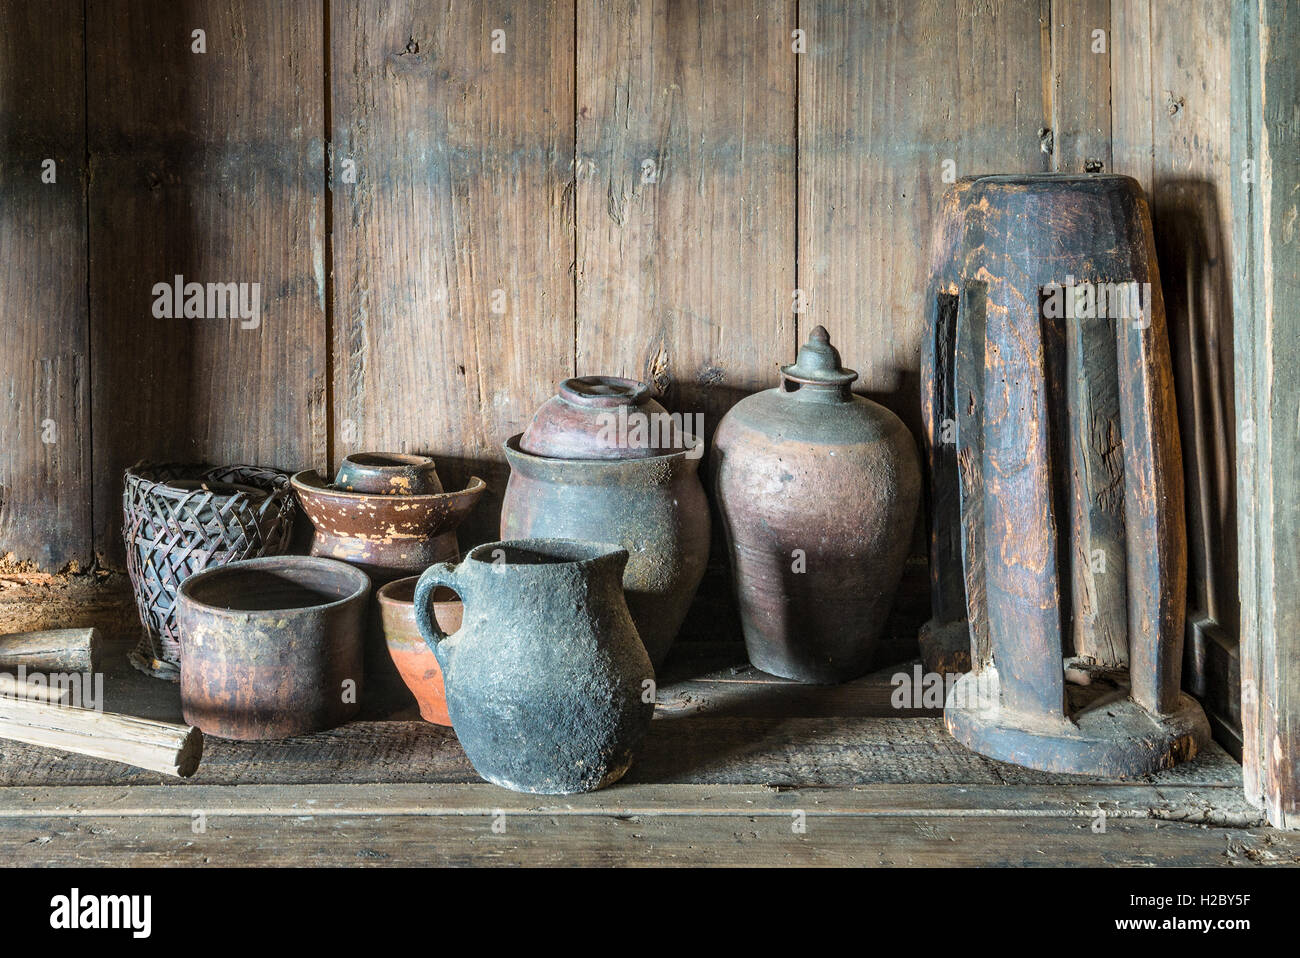 Traditional Chinese old pottery and wooden household items on background of wooden planks Stock Photo